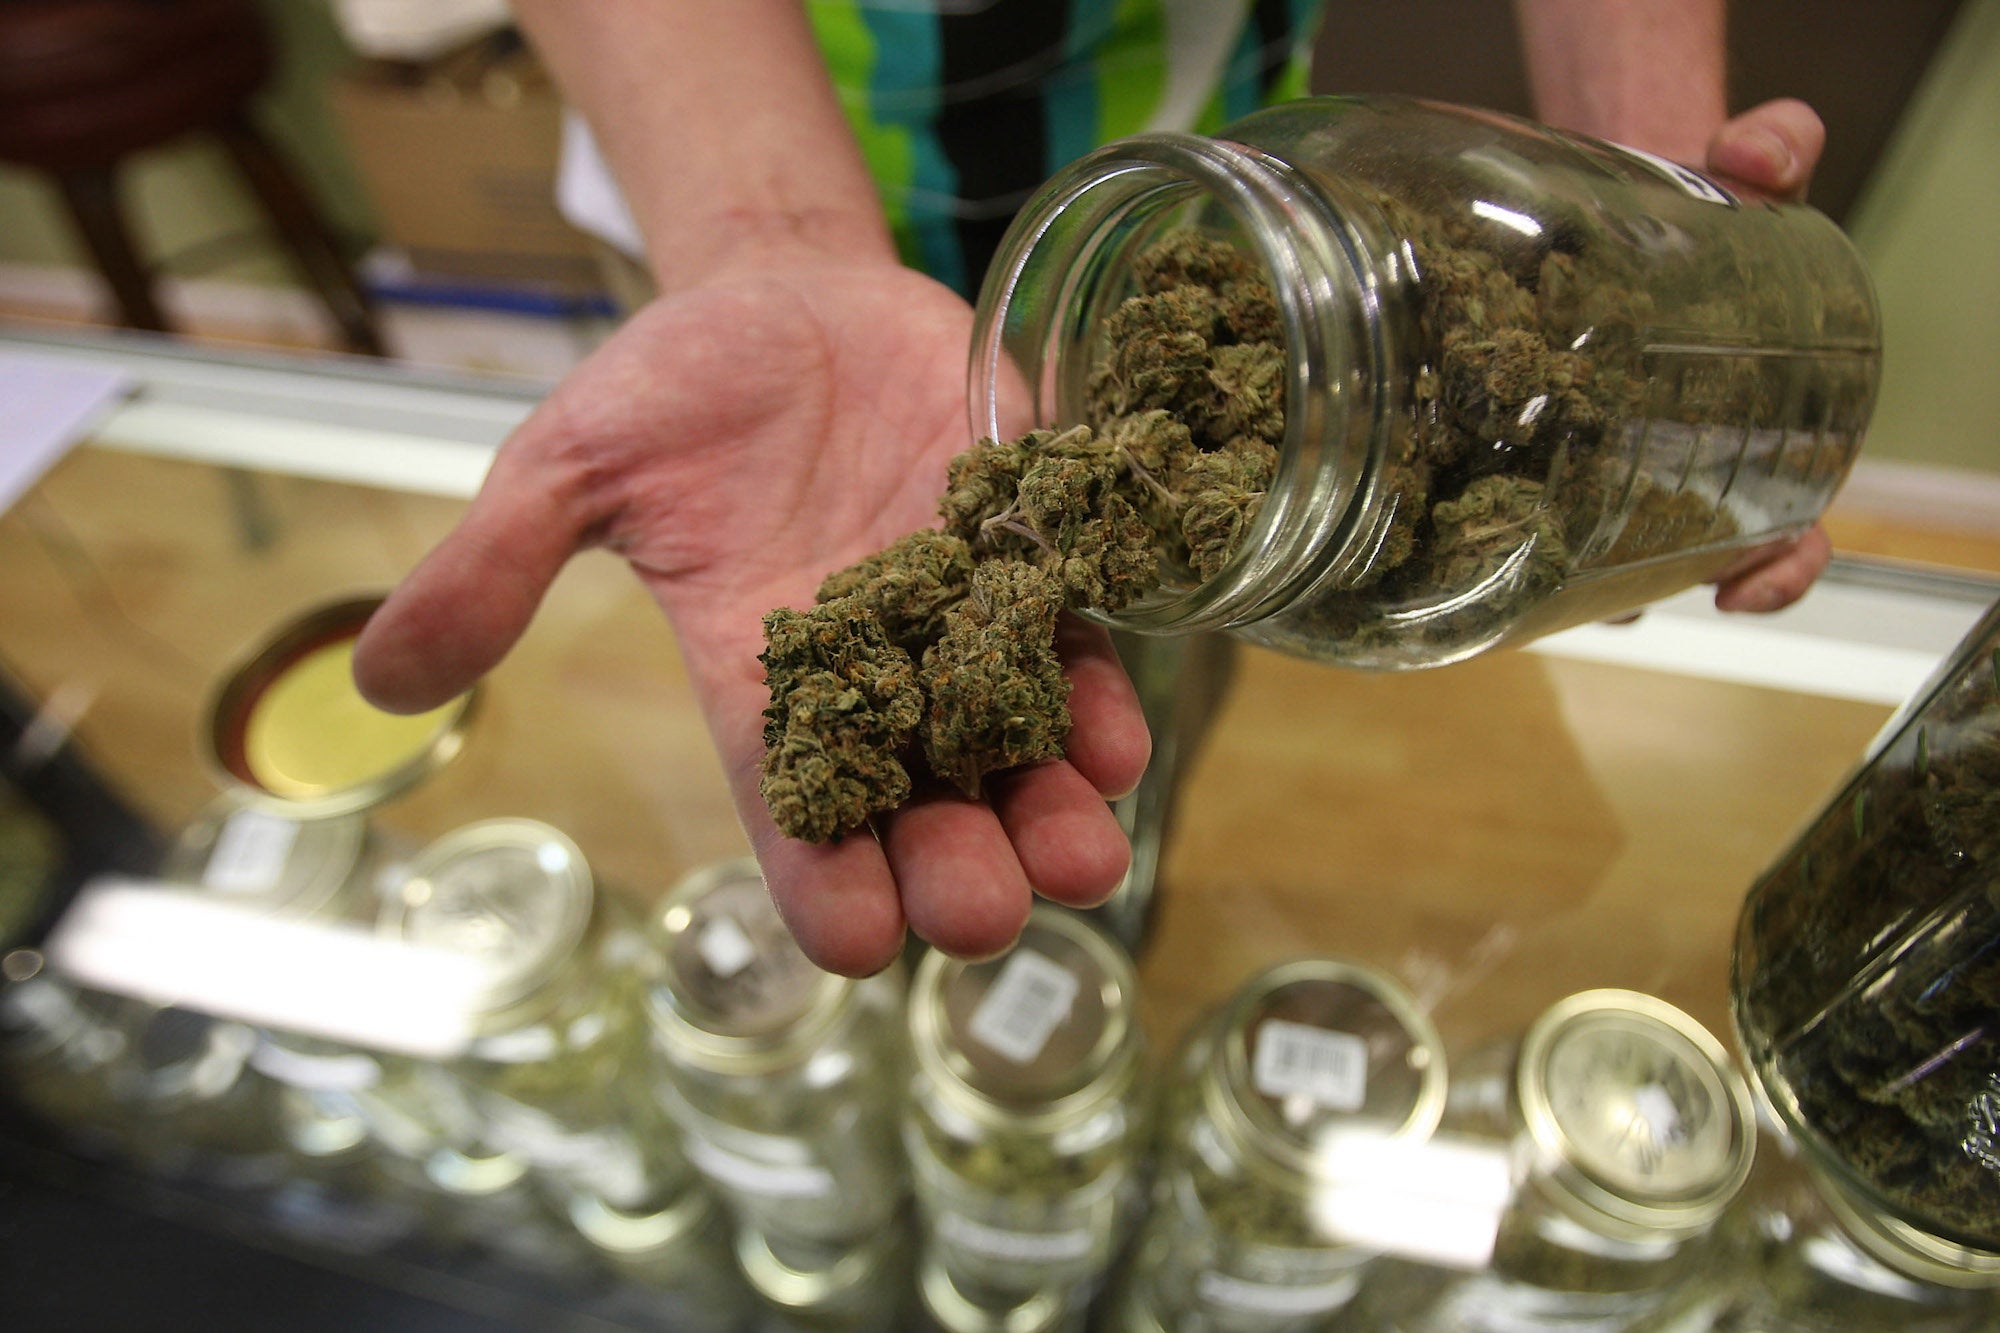 The marijuana business might be booming by 2020.